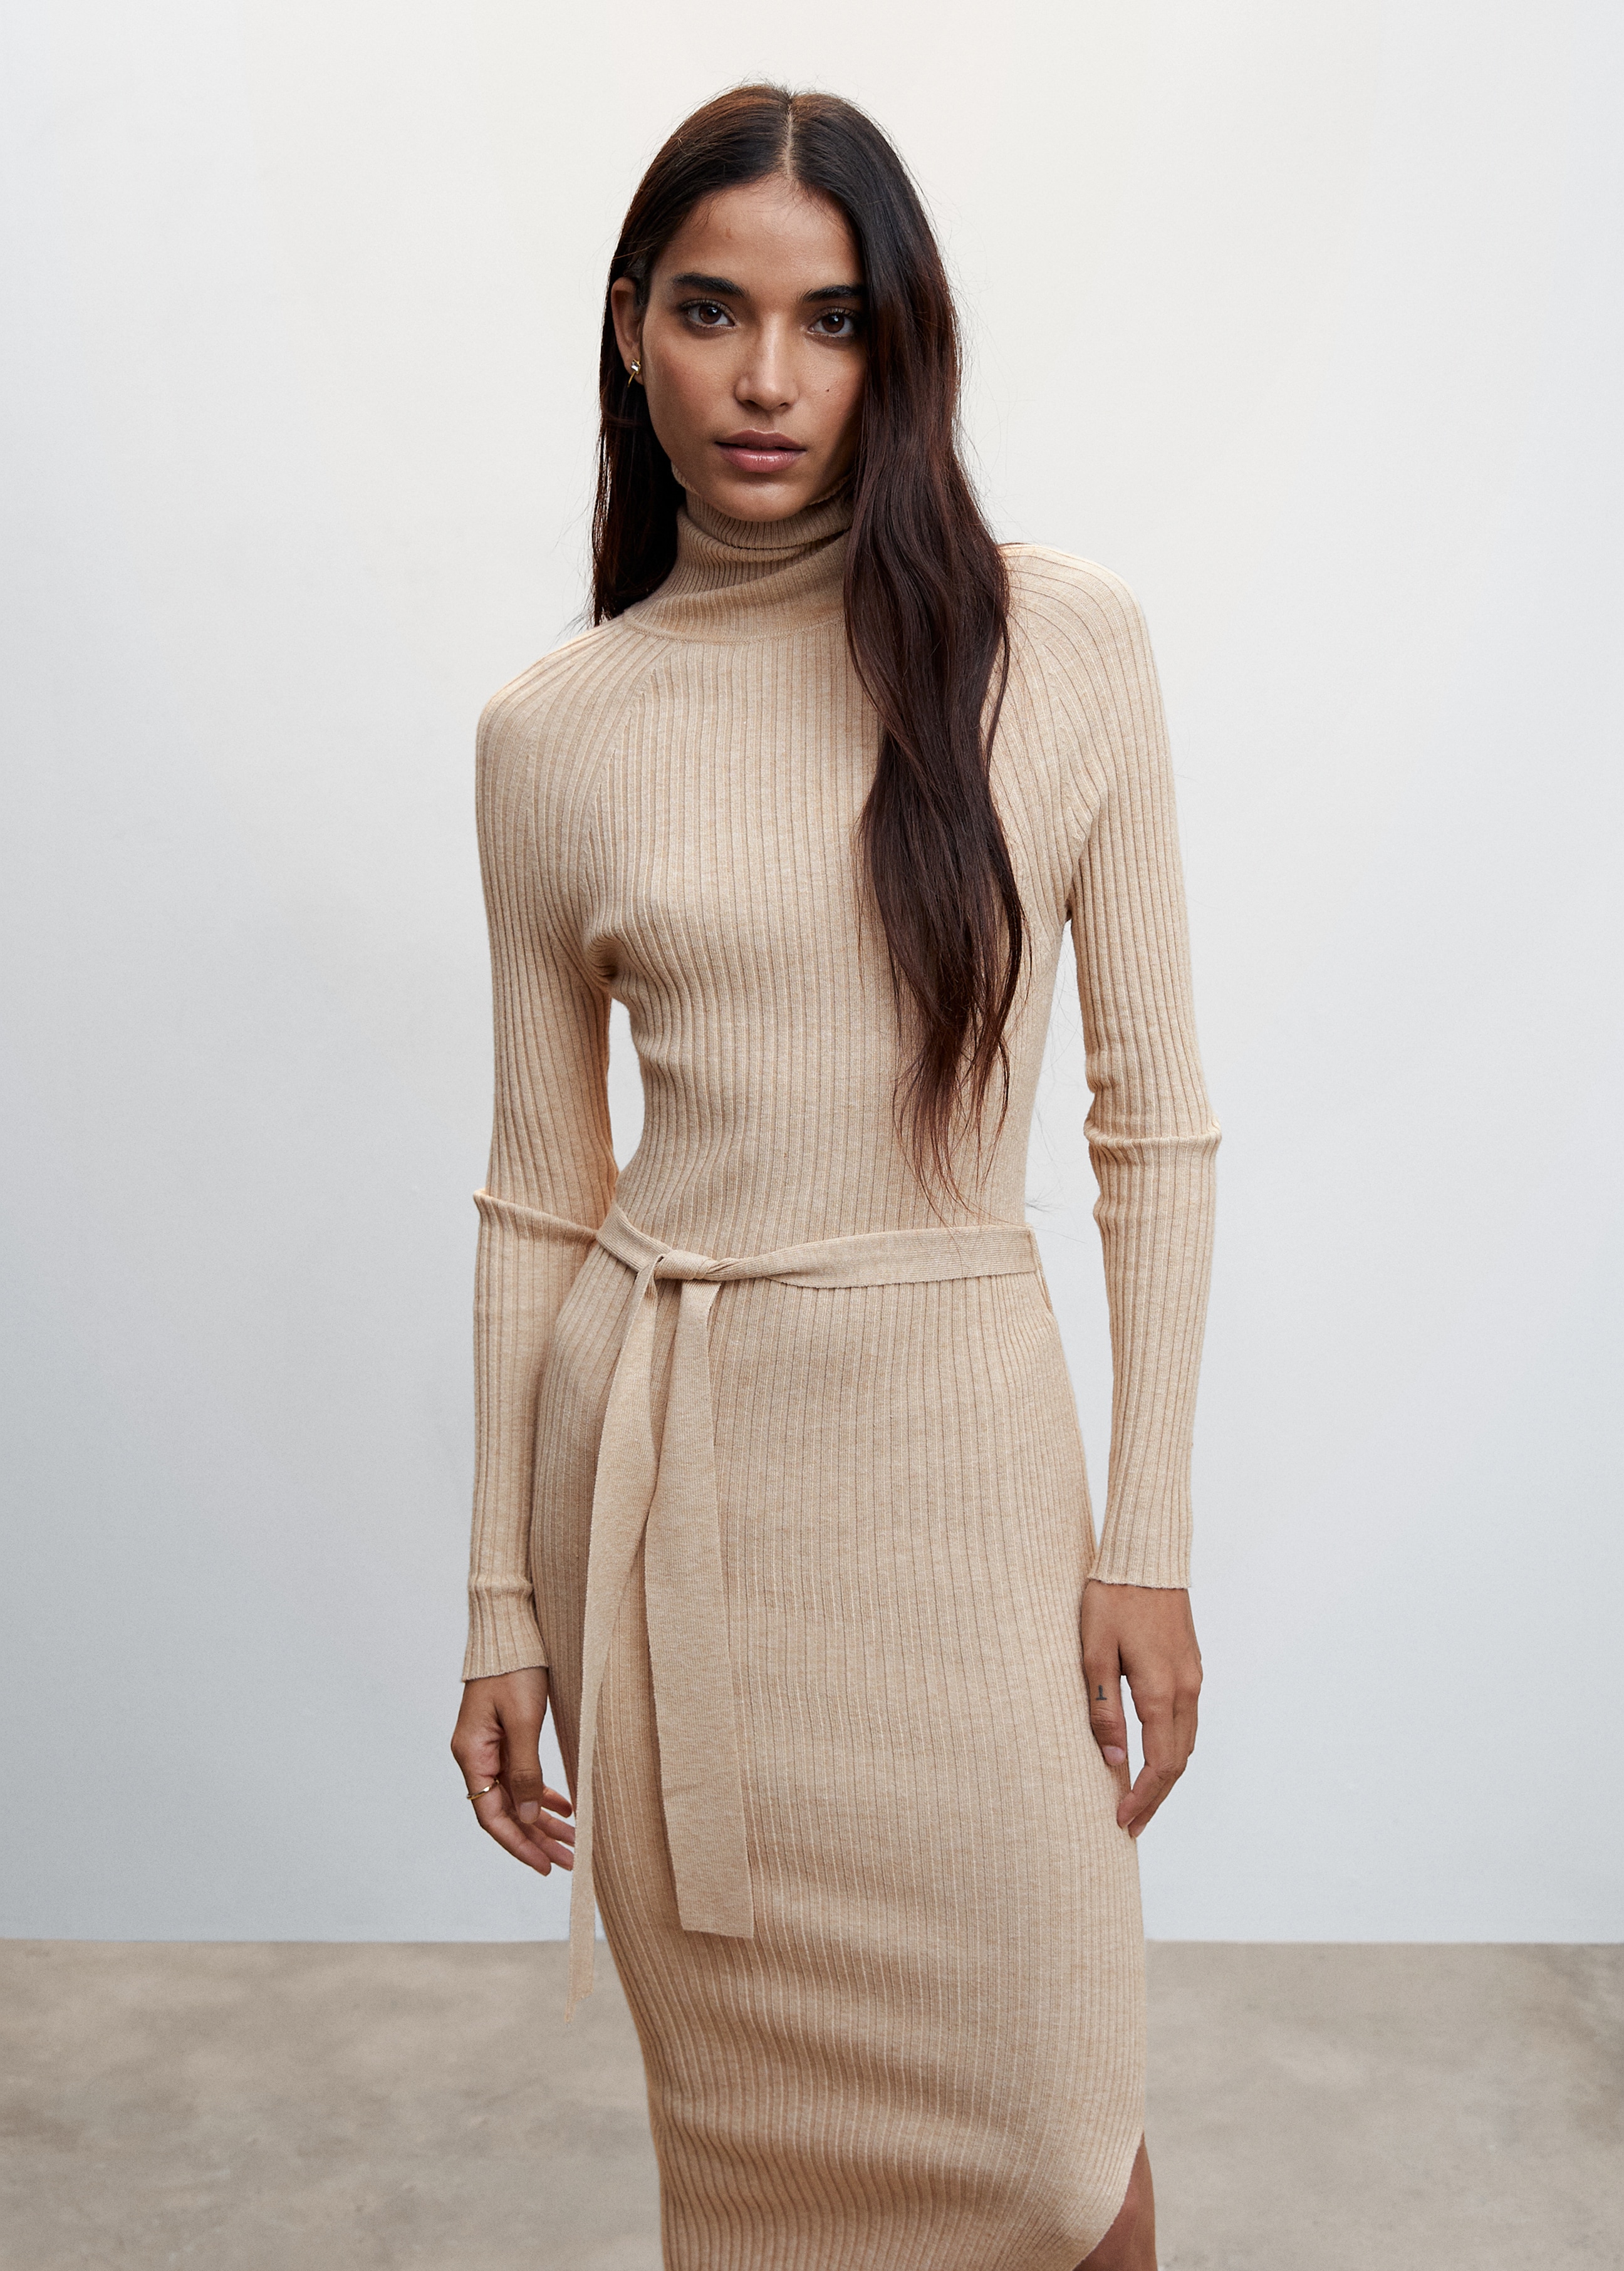 Ribbed dress with knot detail - Medium plane